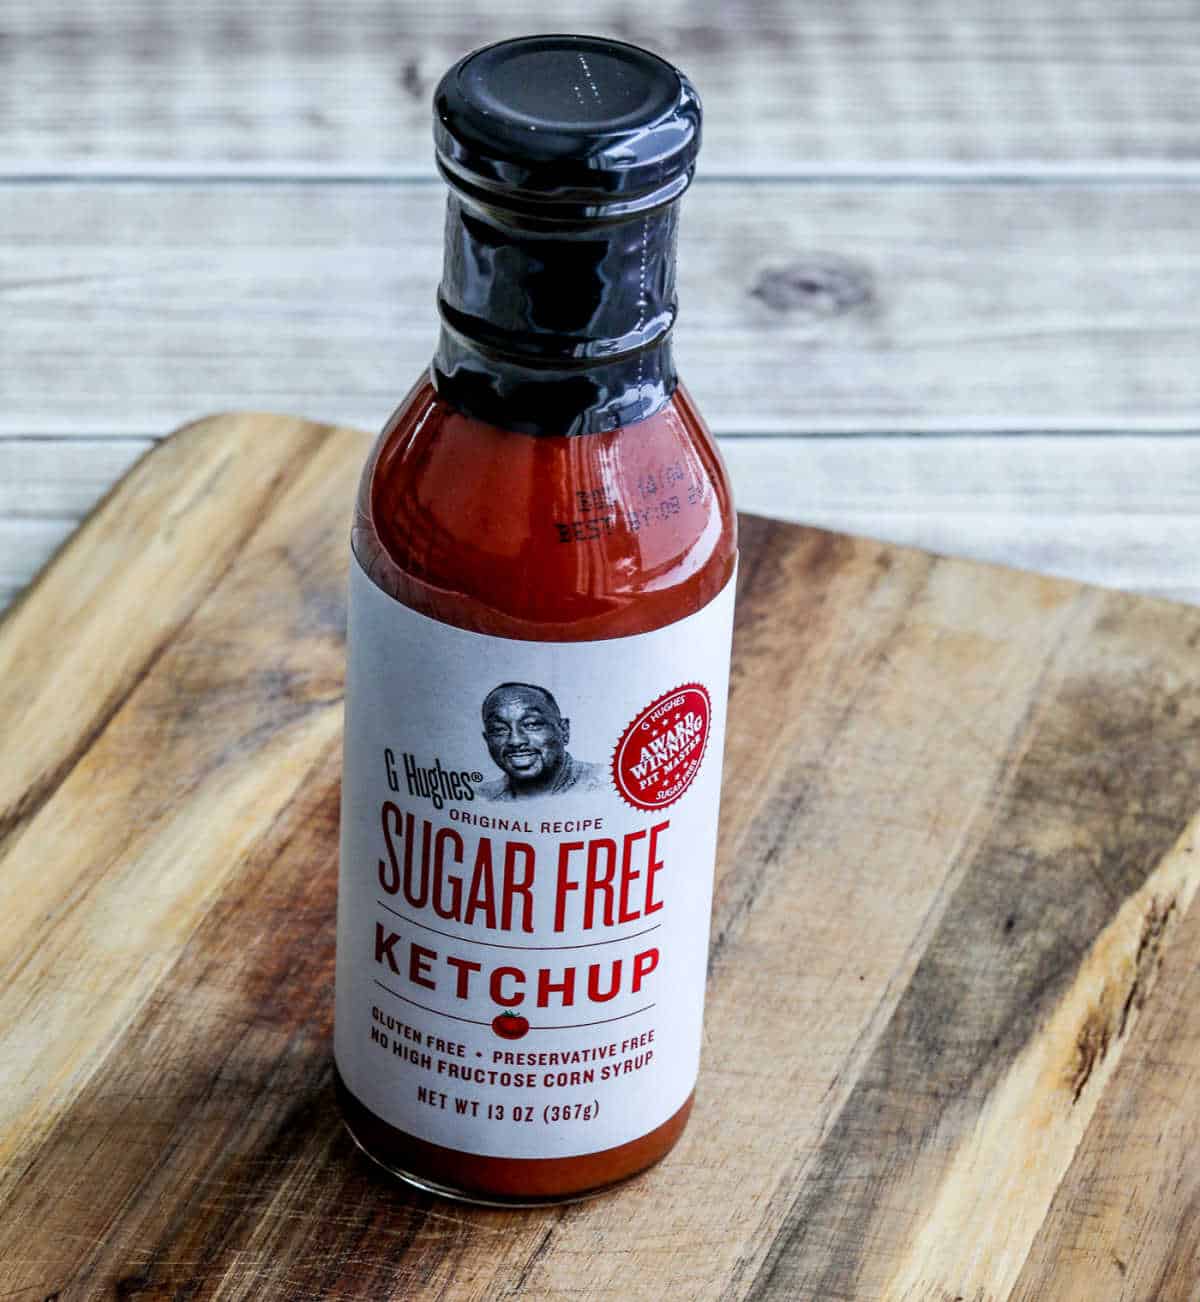 Square image of unsweetened ketchup